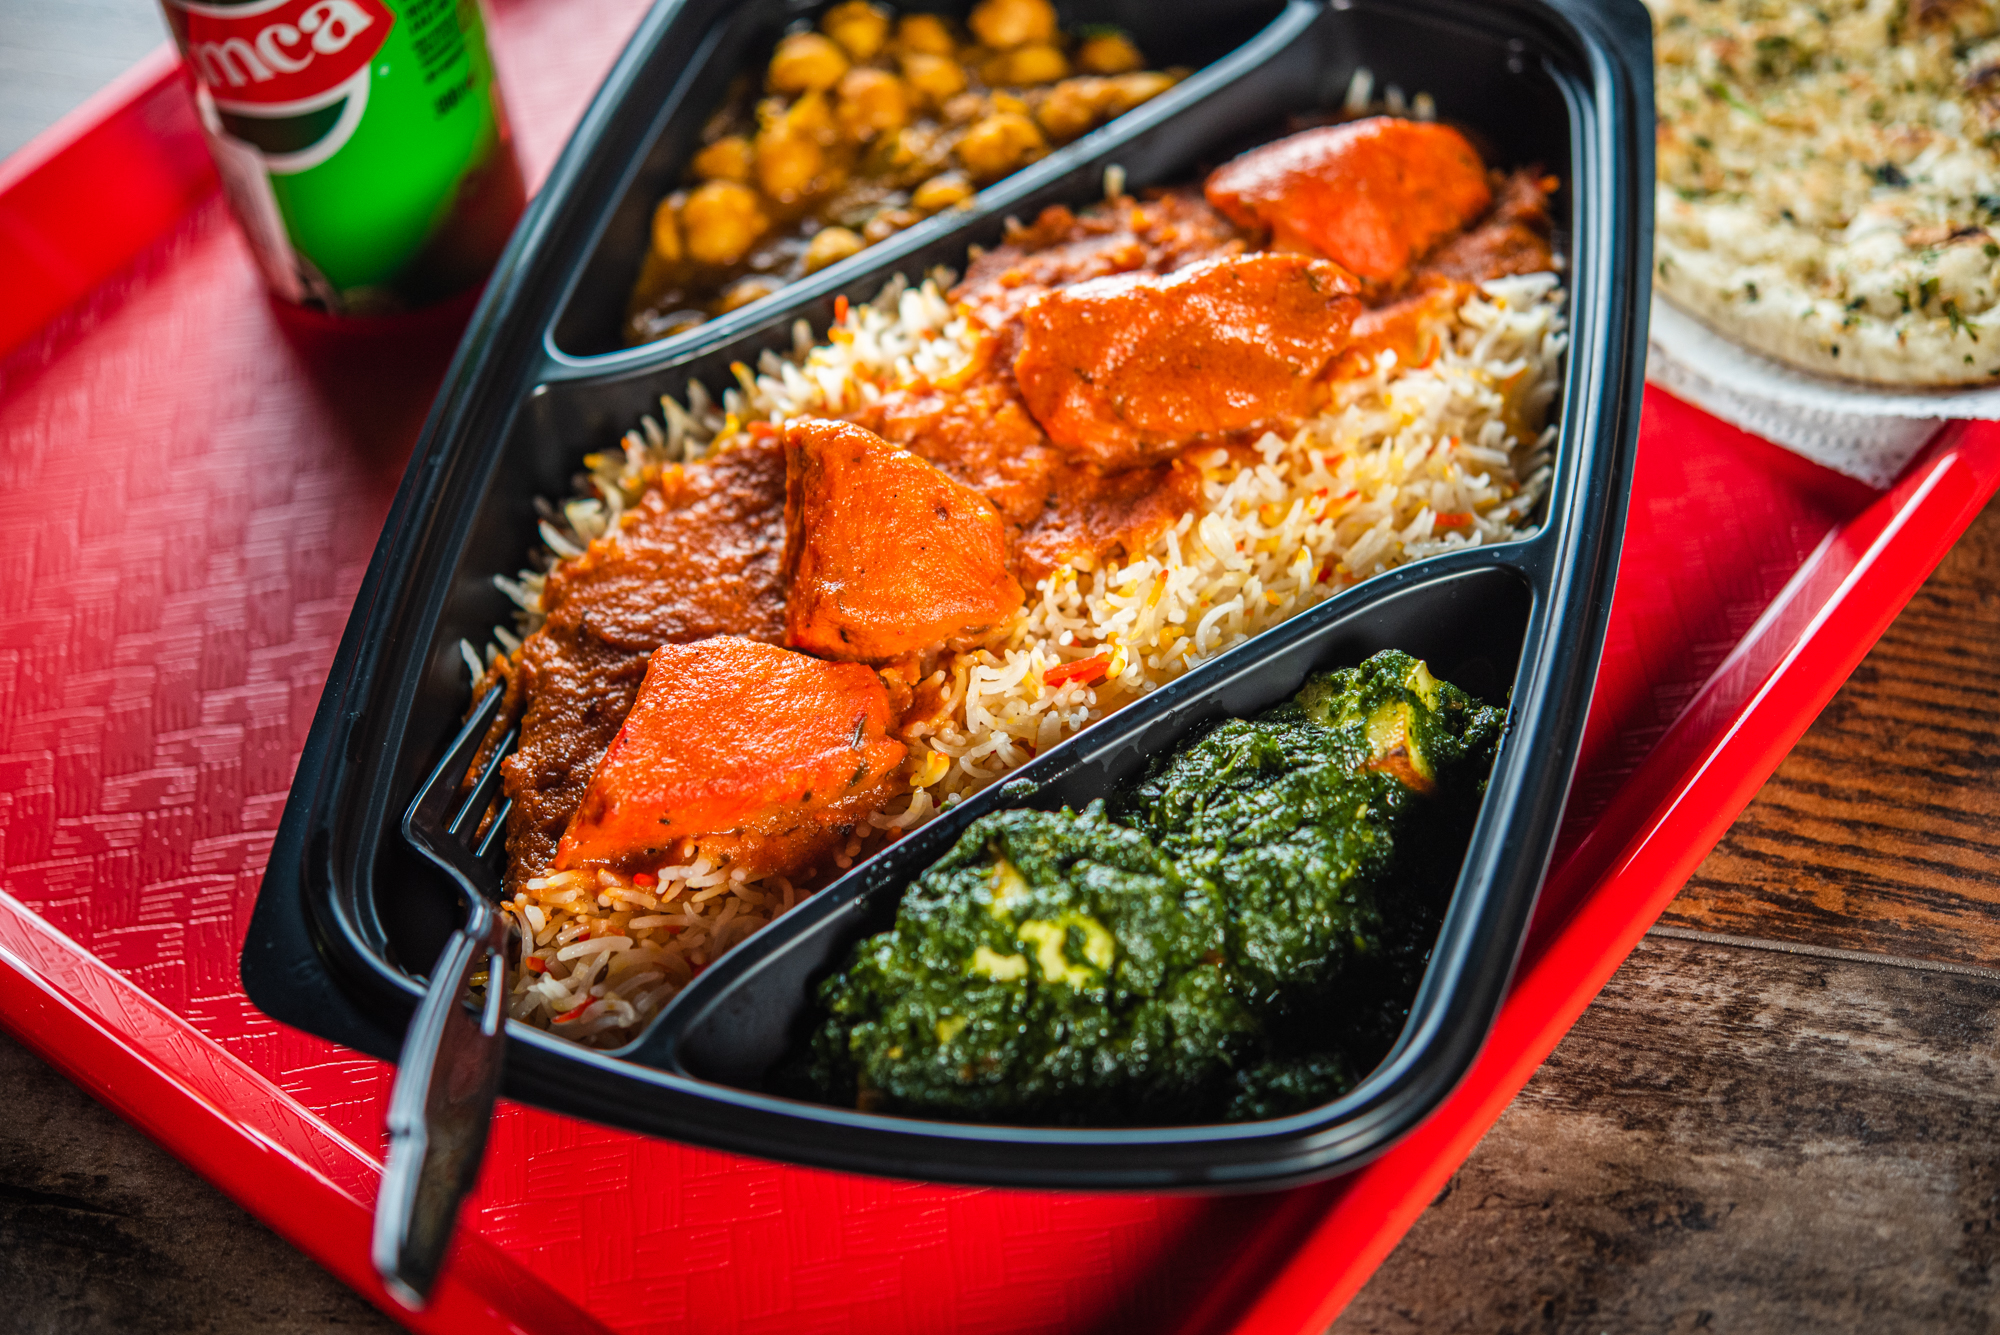 A tray off butter chicken with saag paneer and chana masala at Butter Chicken Company